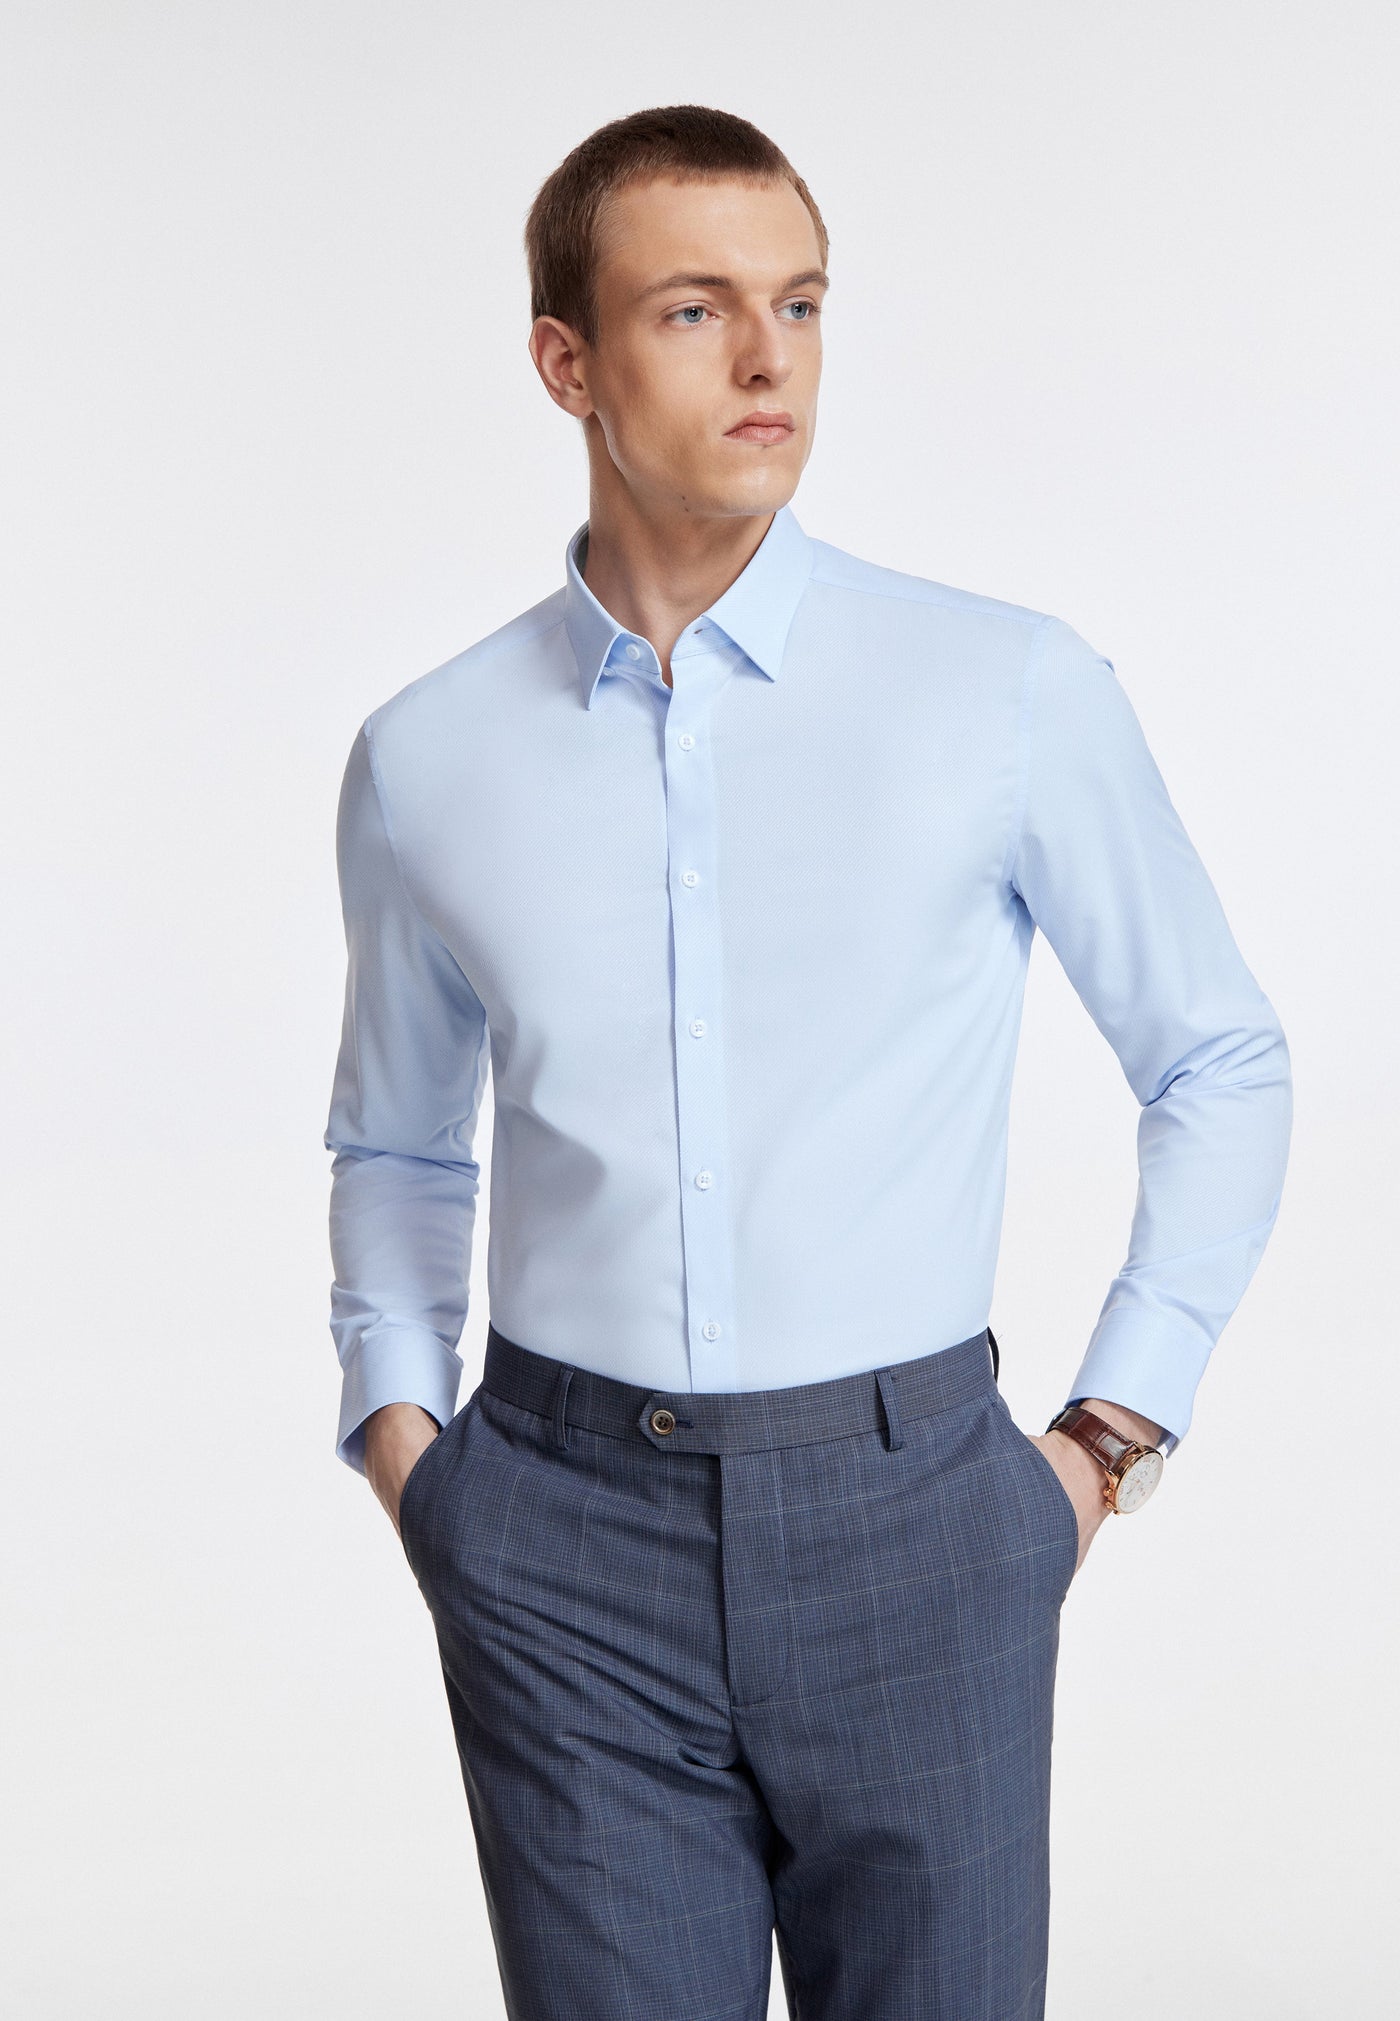 Mendryden - Dry & Sweatwicking Non-Iron Formal Shirt Smart Fit